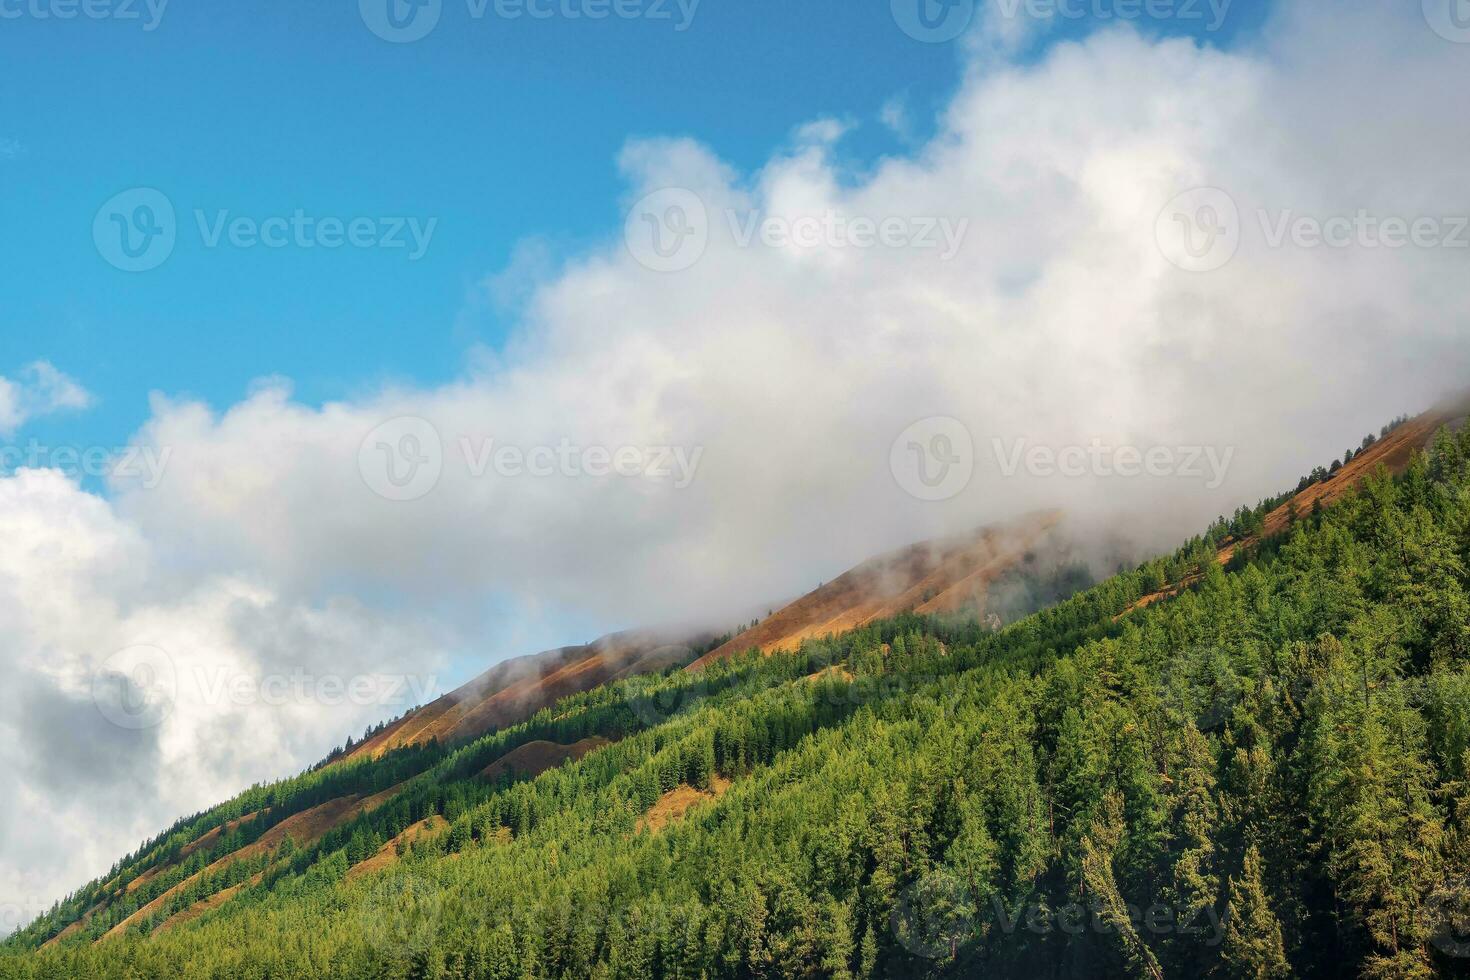 Amazing view from sunlit coniferous trees to fir forest valley and sharp rocky mountain range in low misty clouds. Awesome mountain landscape with cedar forest and sharp rocks. Nature of Altai. photo